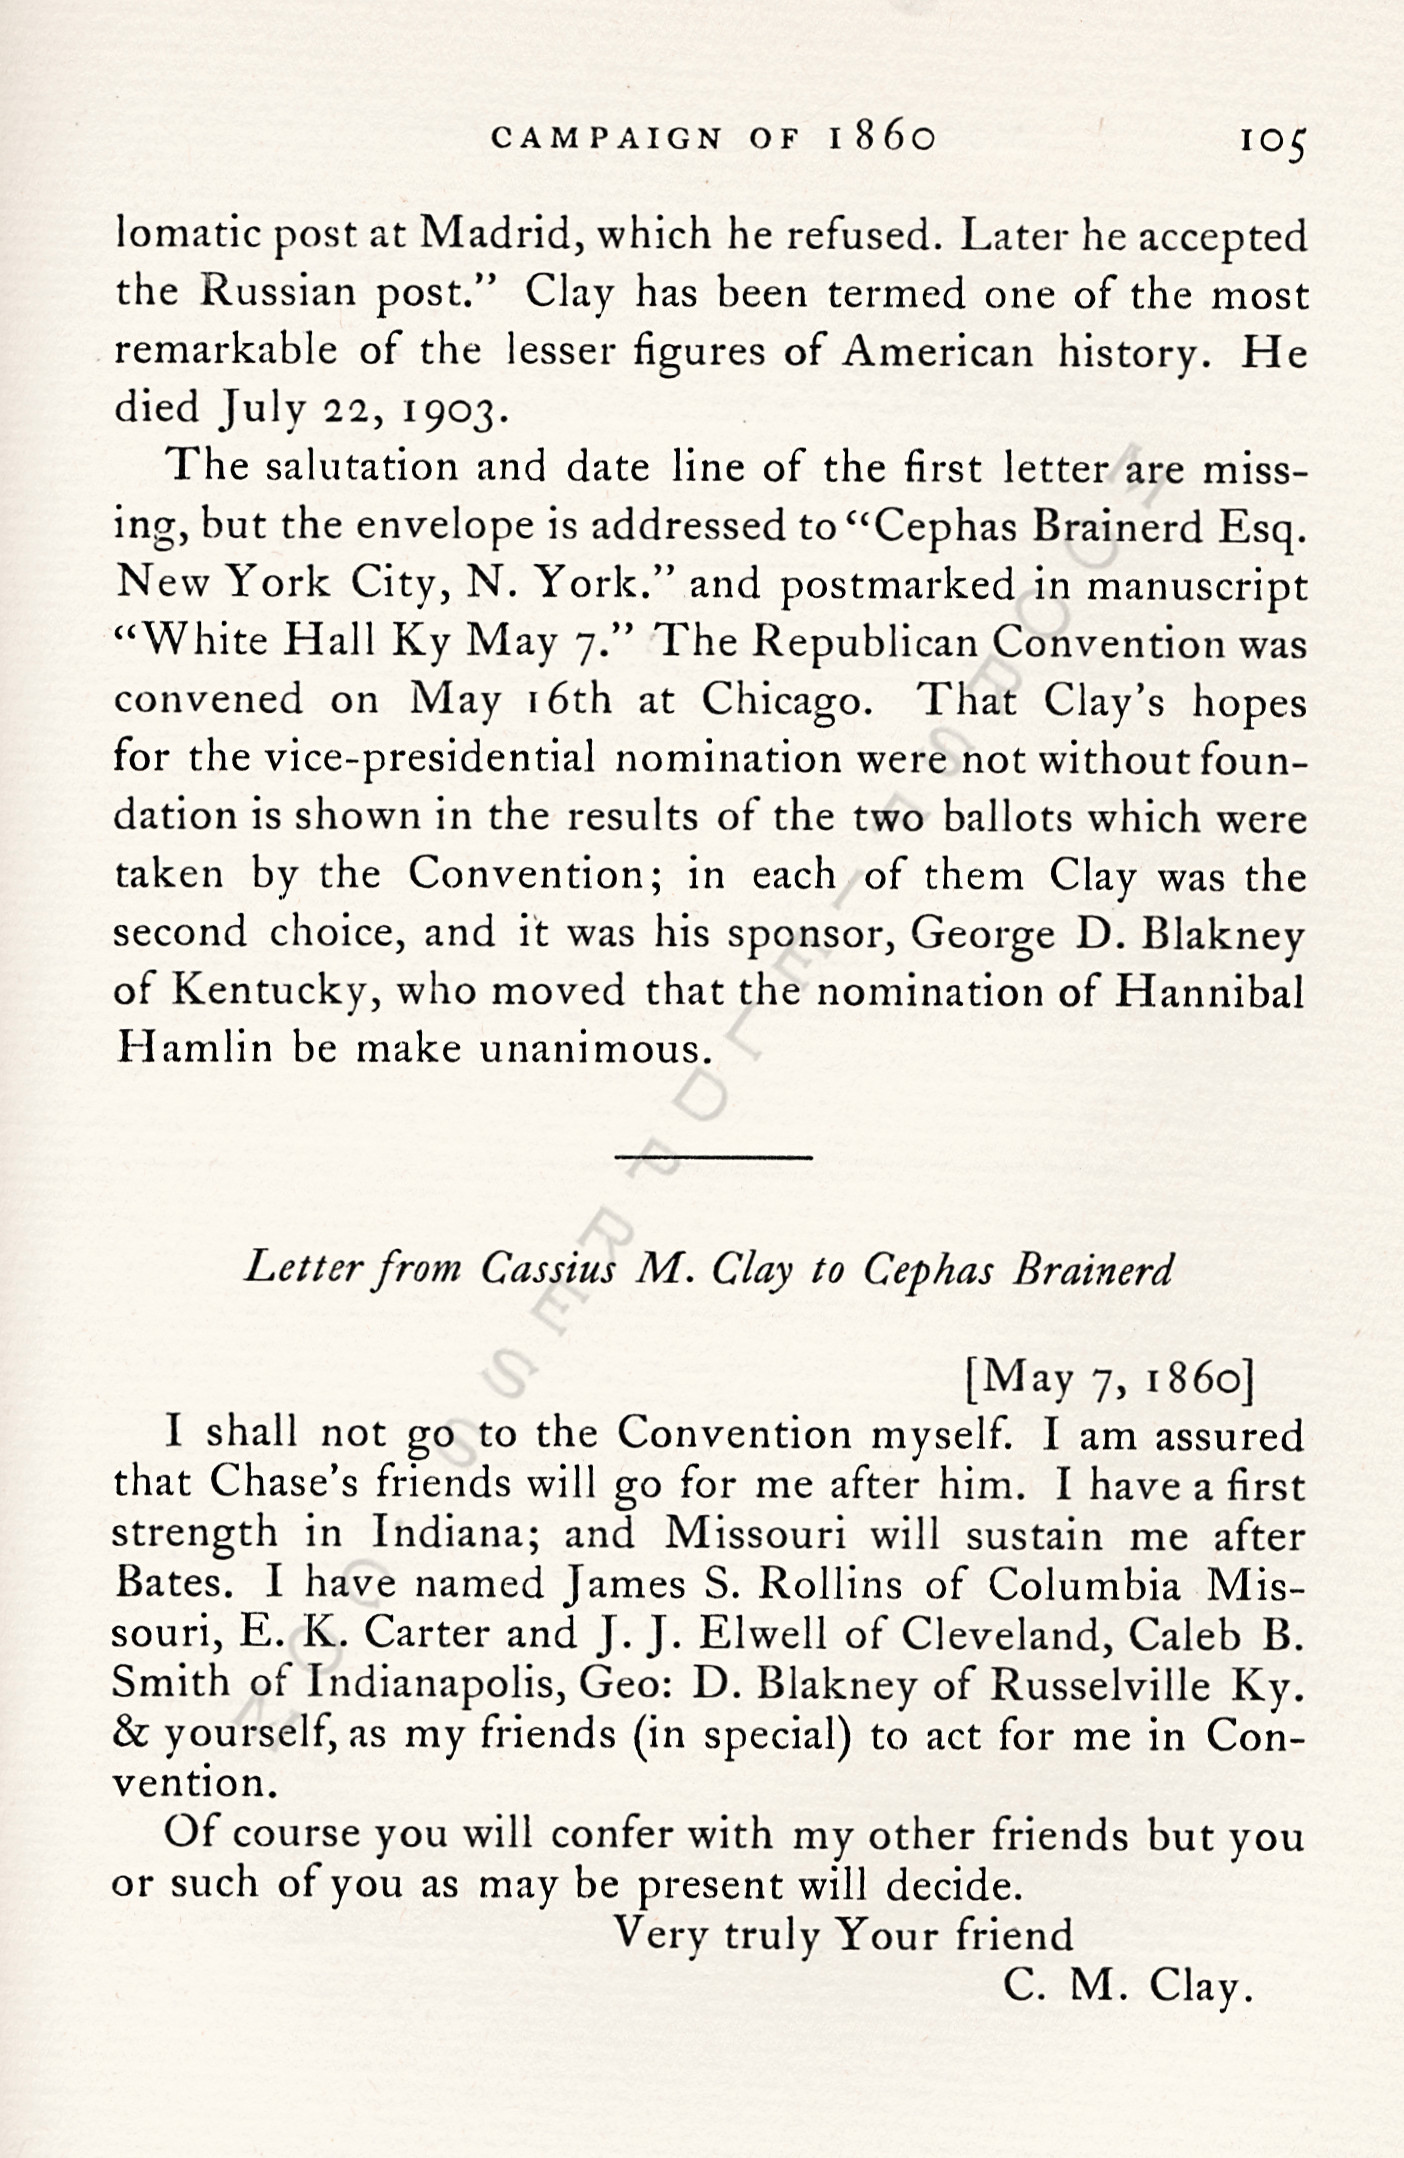 The 1860
                      Presidential Campaign-Letters of Cassius M. Clay
                      to Cephas Brainerd